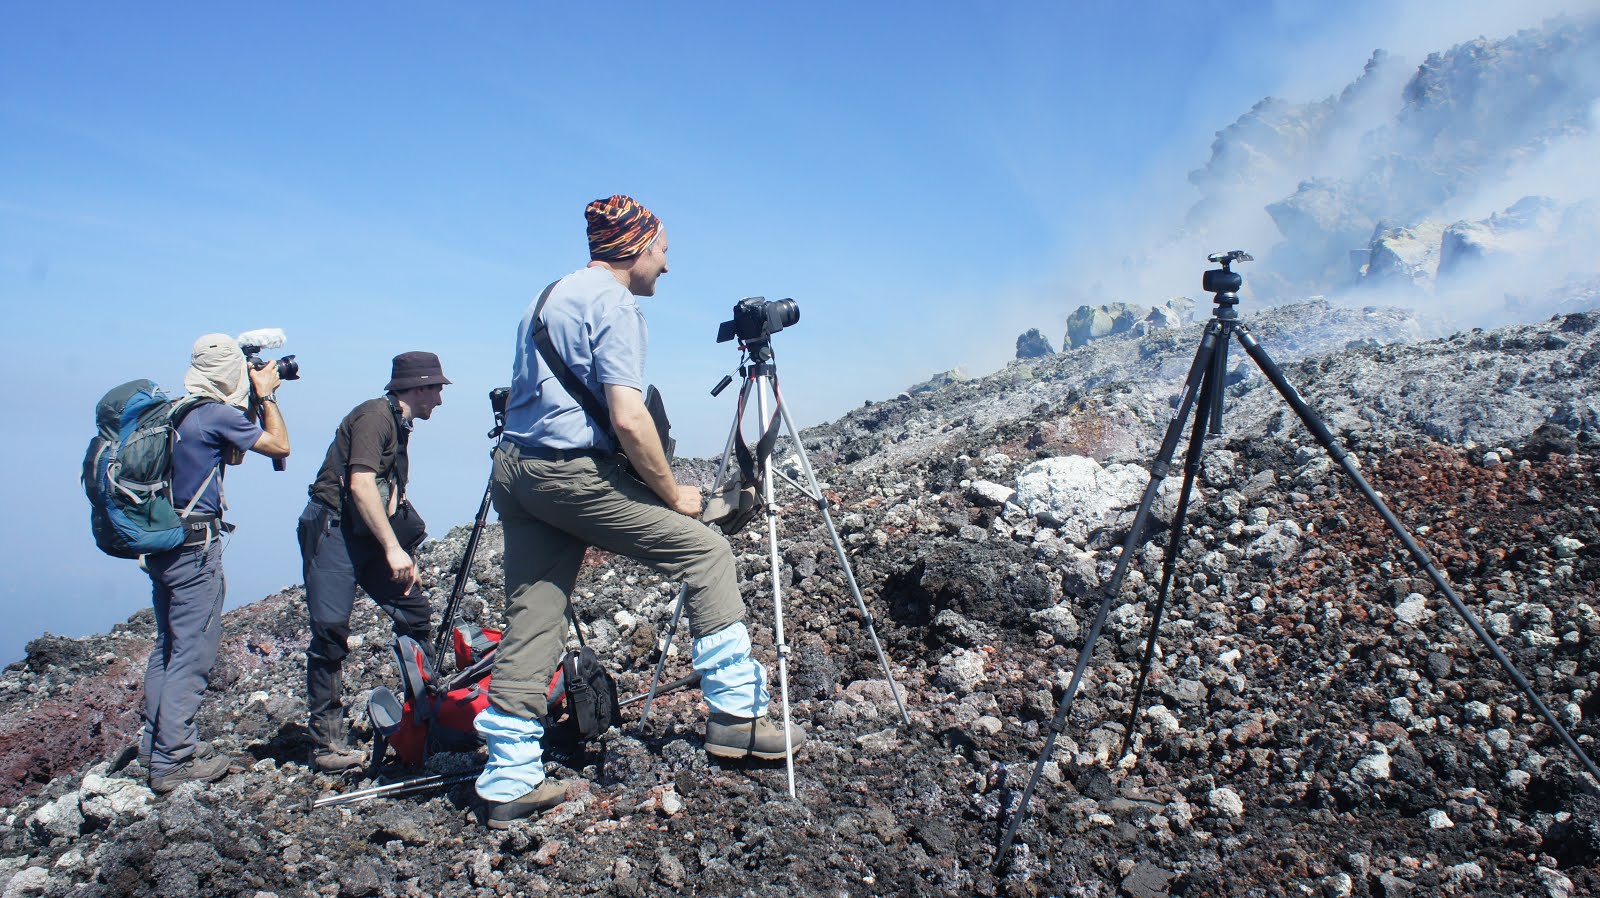 Volcano hikes for Photographers